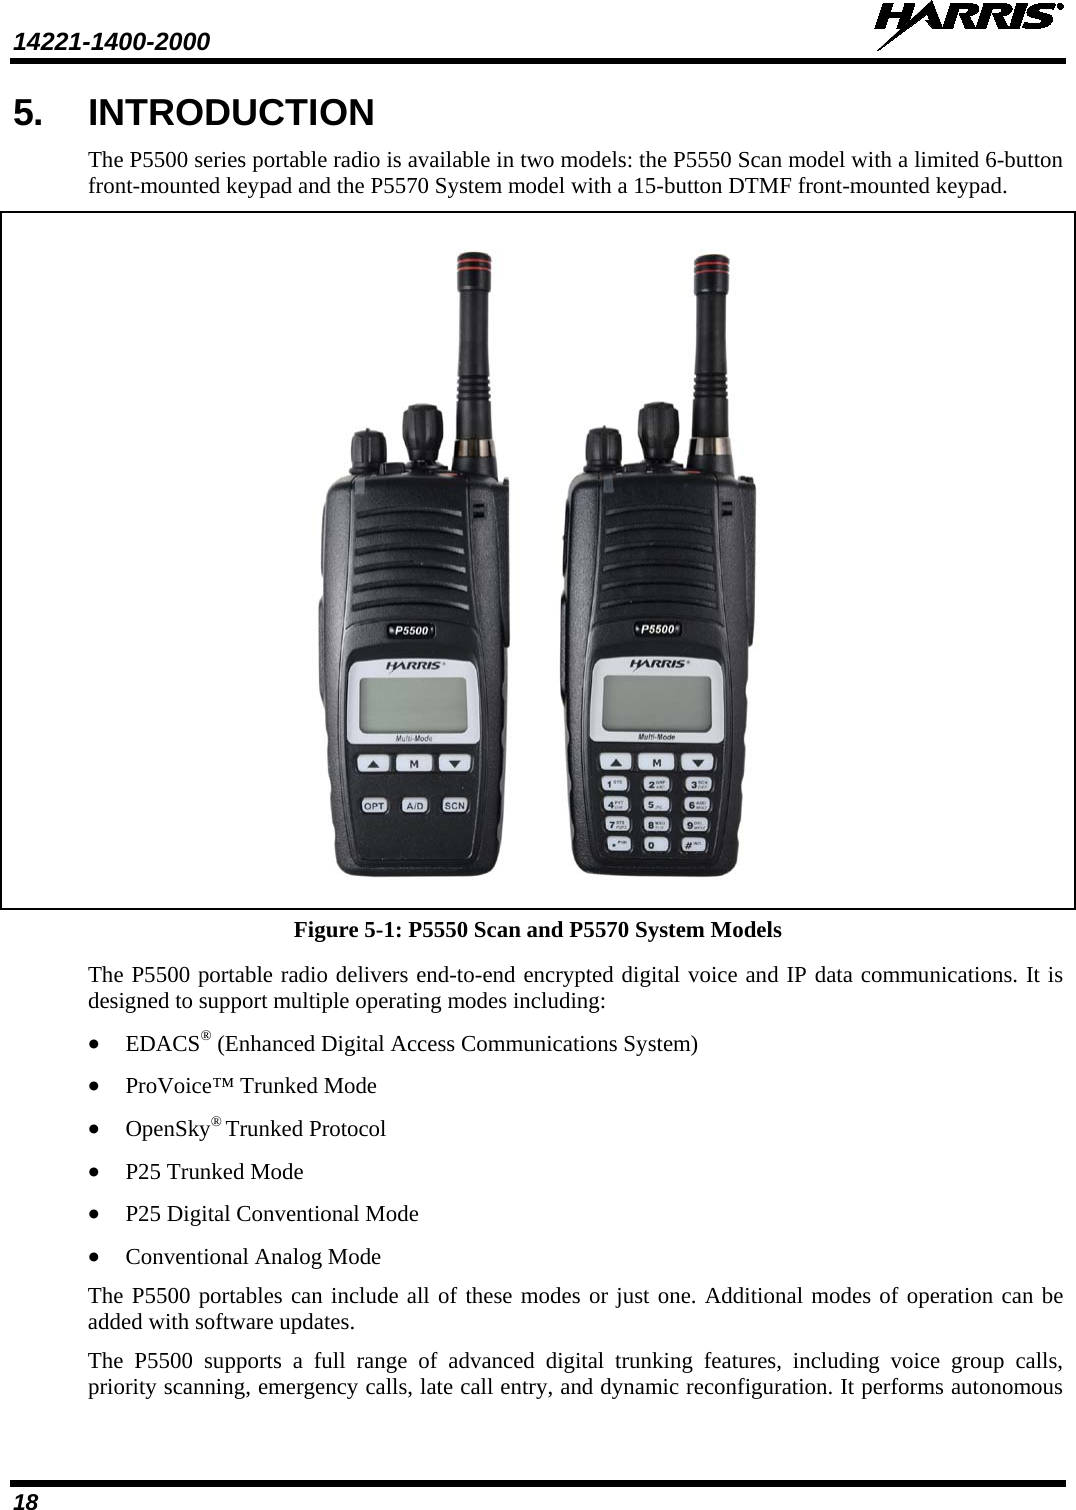 14221-1400-2000    18 5. INTRODUCTION The P5500 series portable radio is available in two models: the P5550 Scan model with a limited 6-button front-mounted keypad and the P5570 System model with a 15-button DTMF front-mounted keypad.     Figure 5-1: P5550 Scan and P5570 System Models The P5500 portable radio delivers end-to-end encrypted digital voice and IP data communications. It is designed to support multiple operating modes including: • EDACS® (Enhanced Digital Access Communications System) • ProVoice™ Trunked Mode • OpenSky® Trunked Protocol • P25 Trunked Mode • P25 Digital Conventional Mode • Conventional Analog Mode The P5500 portables can include all of these modes or just one. Additional modes of operation can be added with software updates. The  P5500 supports a full range of advanced digital trunking features, including voice group calls, priority scanning, emergency calls, late call entry, and dynamic reconfiguration. It performs autonomous 